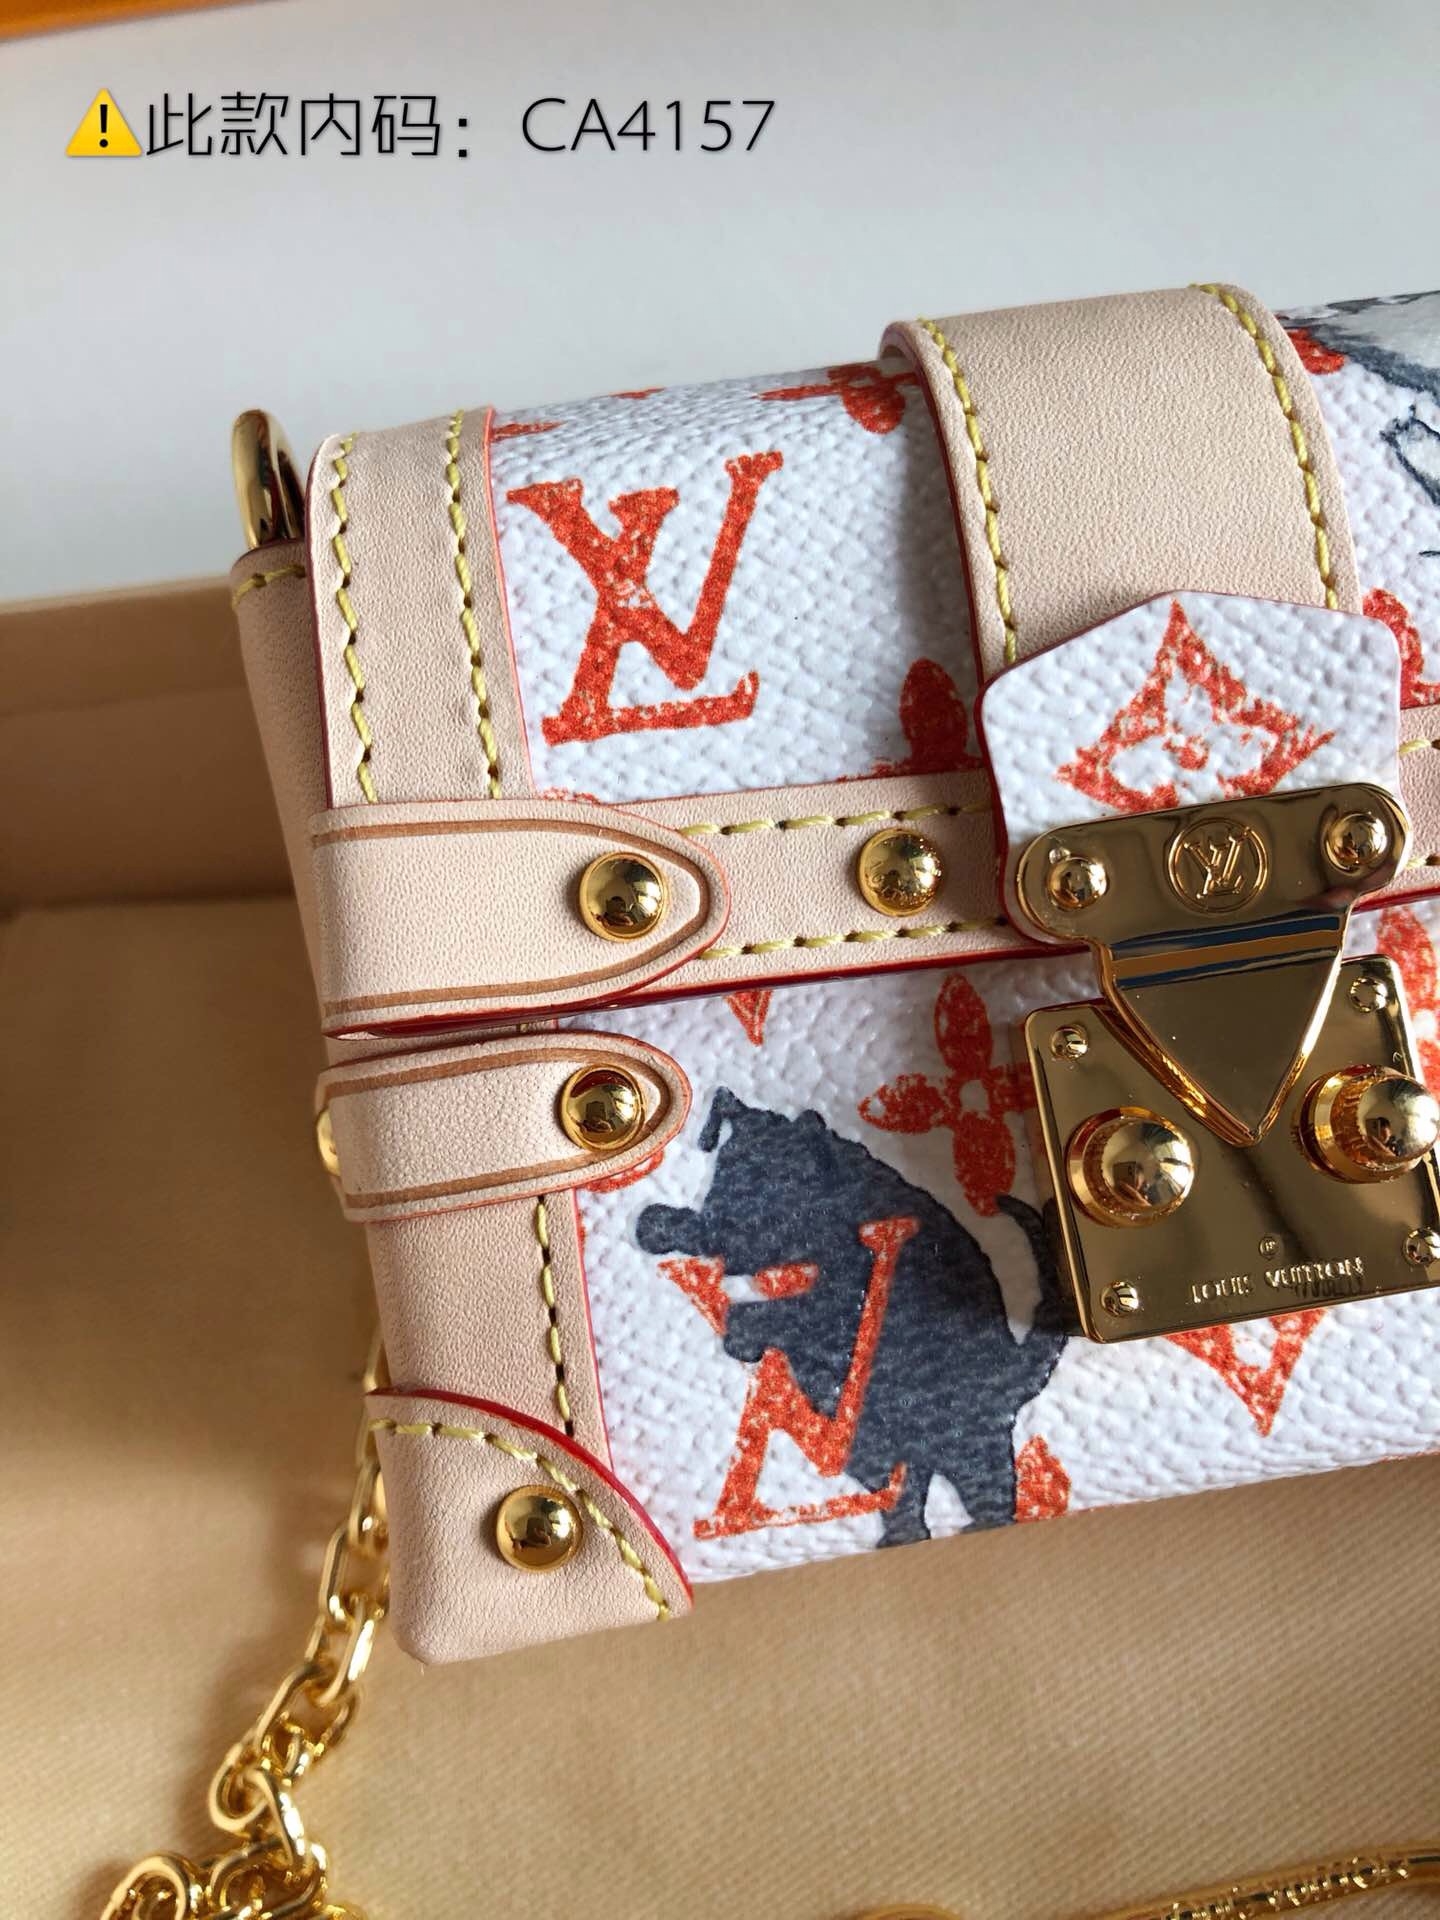 Watch this: It's The Louis Vuitton Essential Trunk 